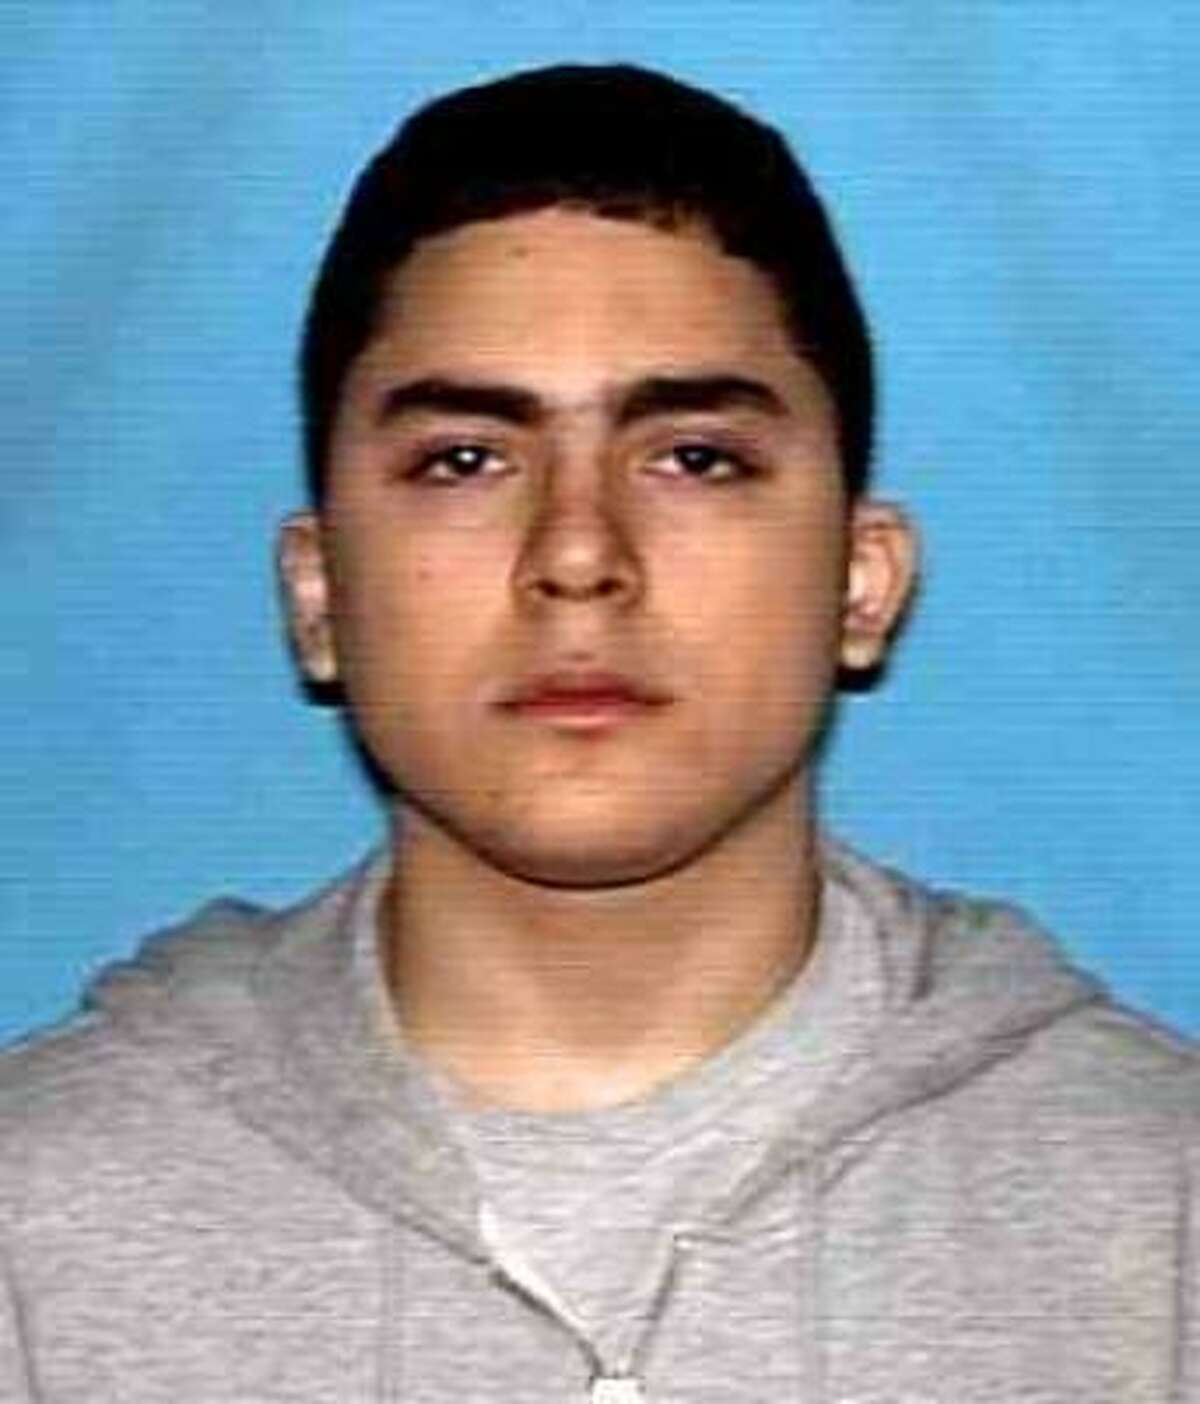 Police have identified the shooter as 19-year-old sophomore Colton Joshua Tooley.